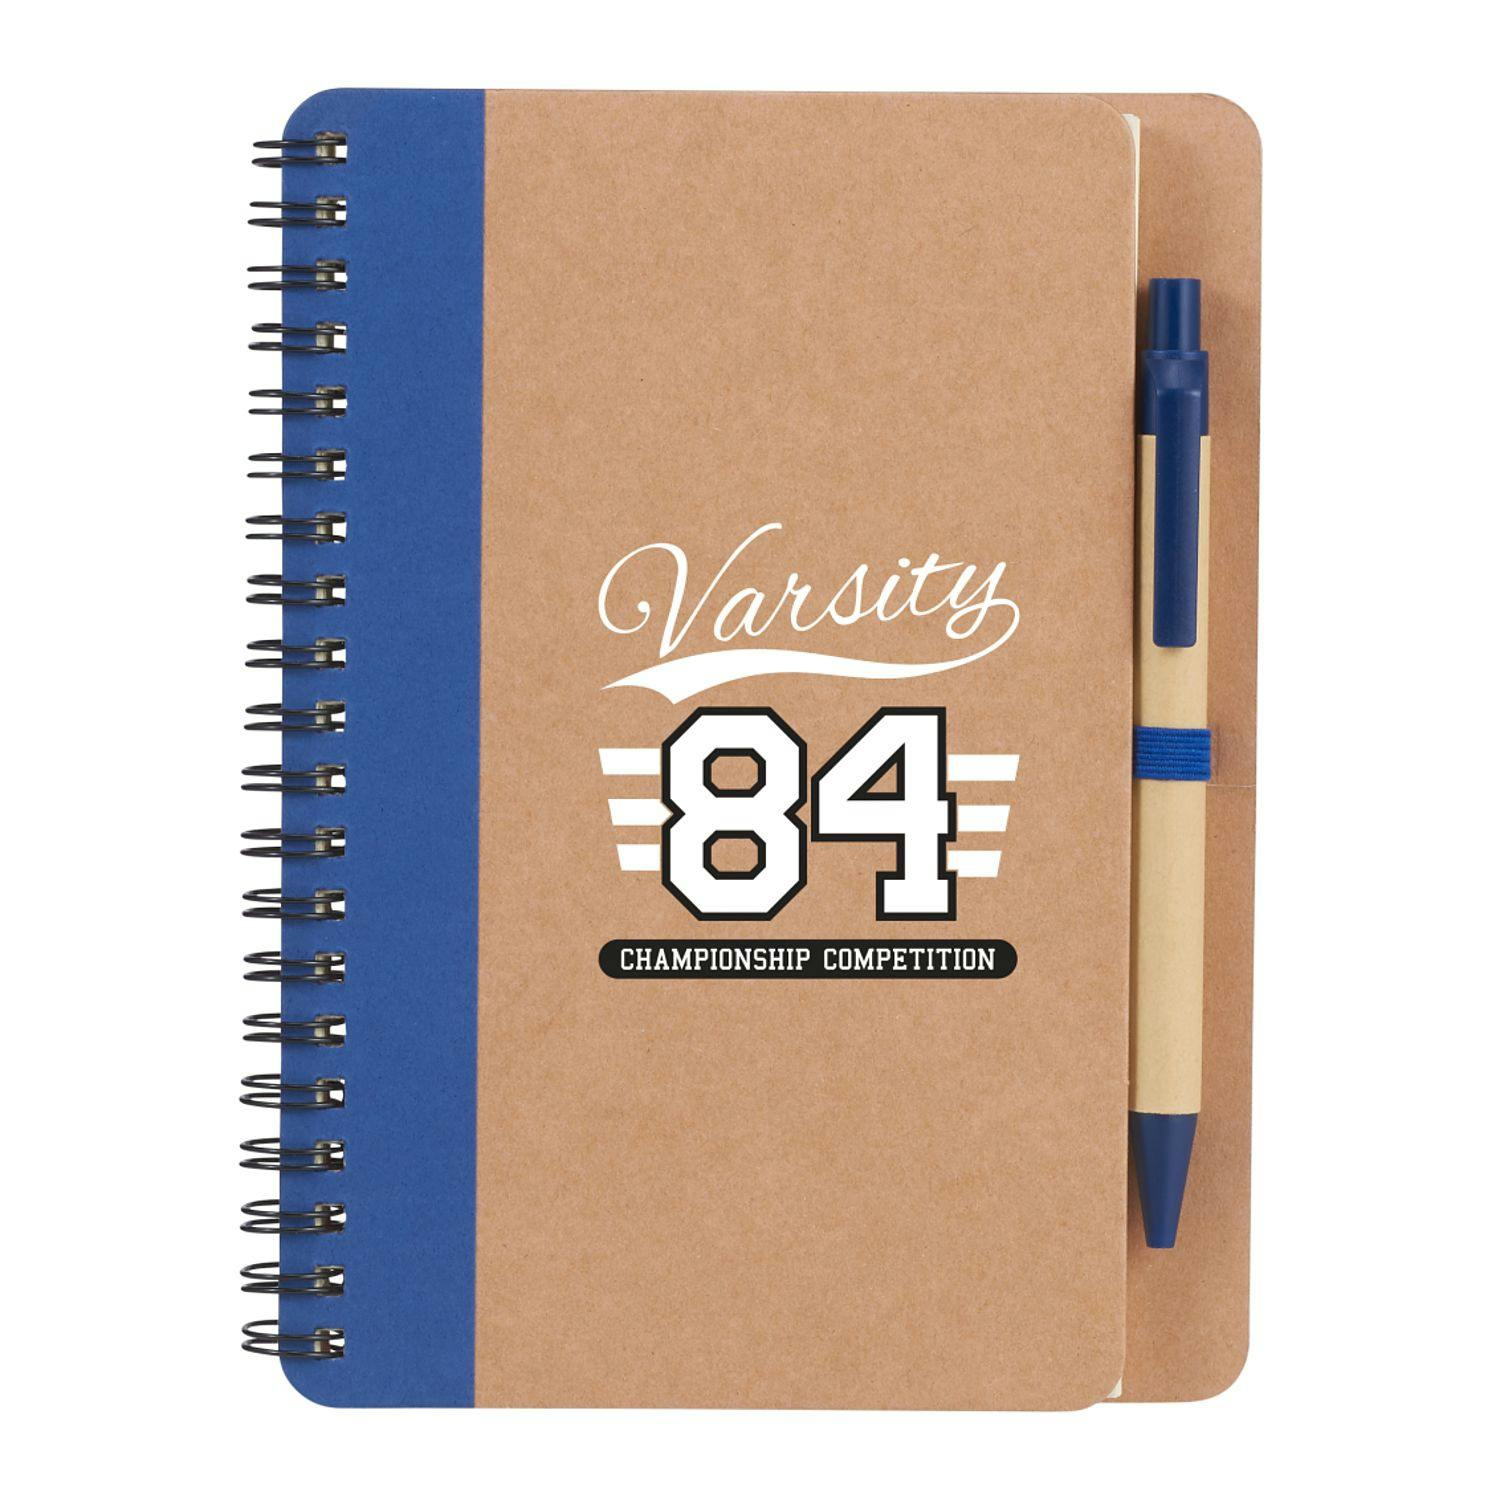 5" x 7" Eco Spiral Notebook with Pen - additional Image 1